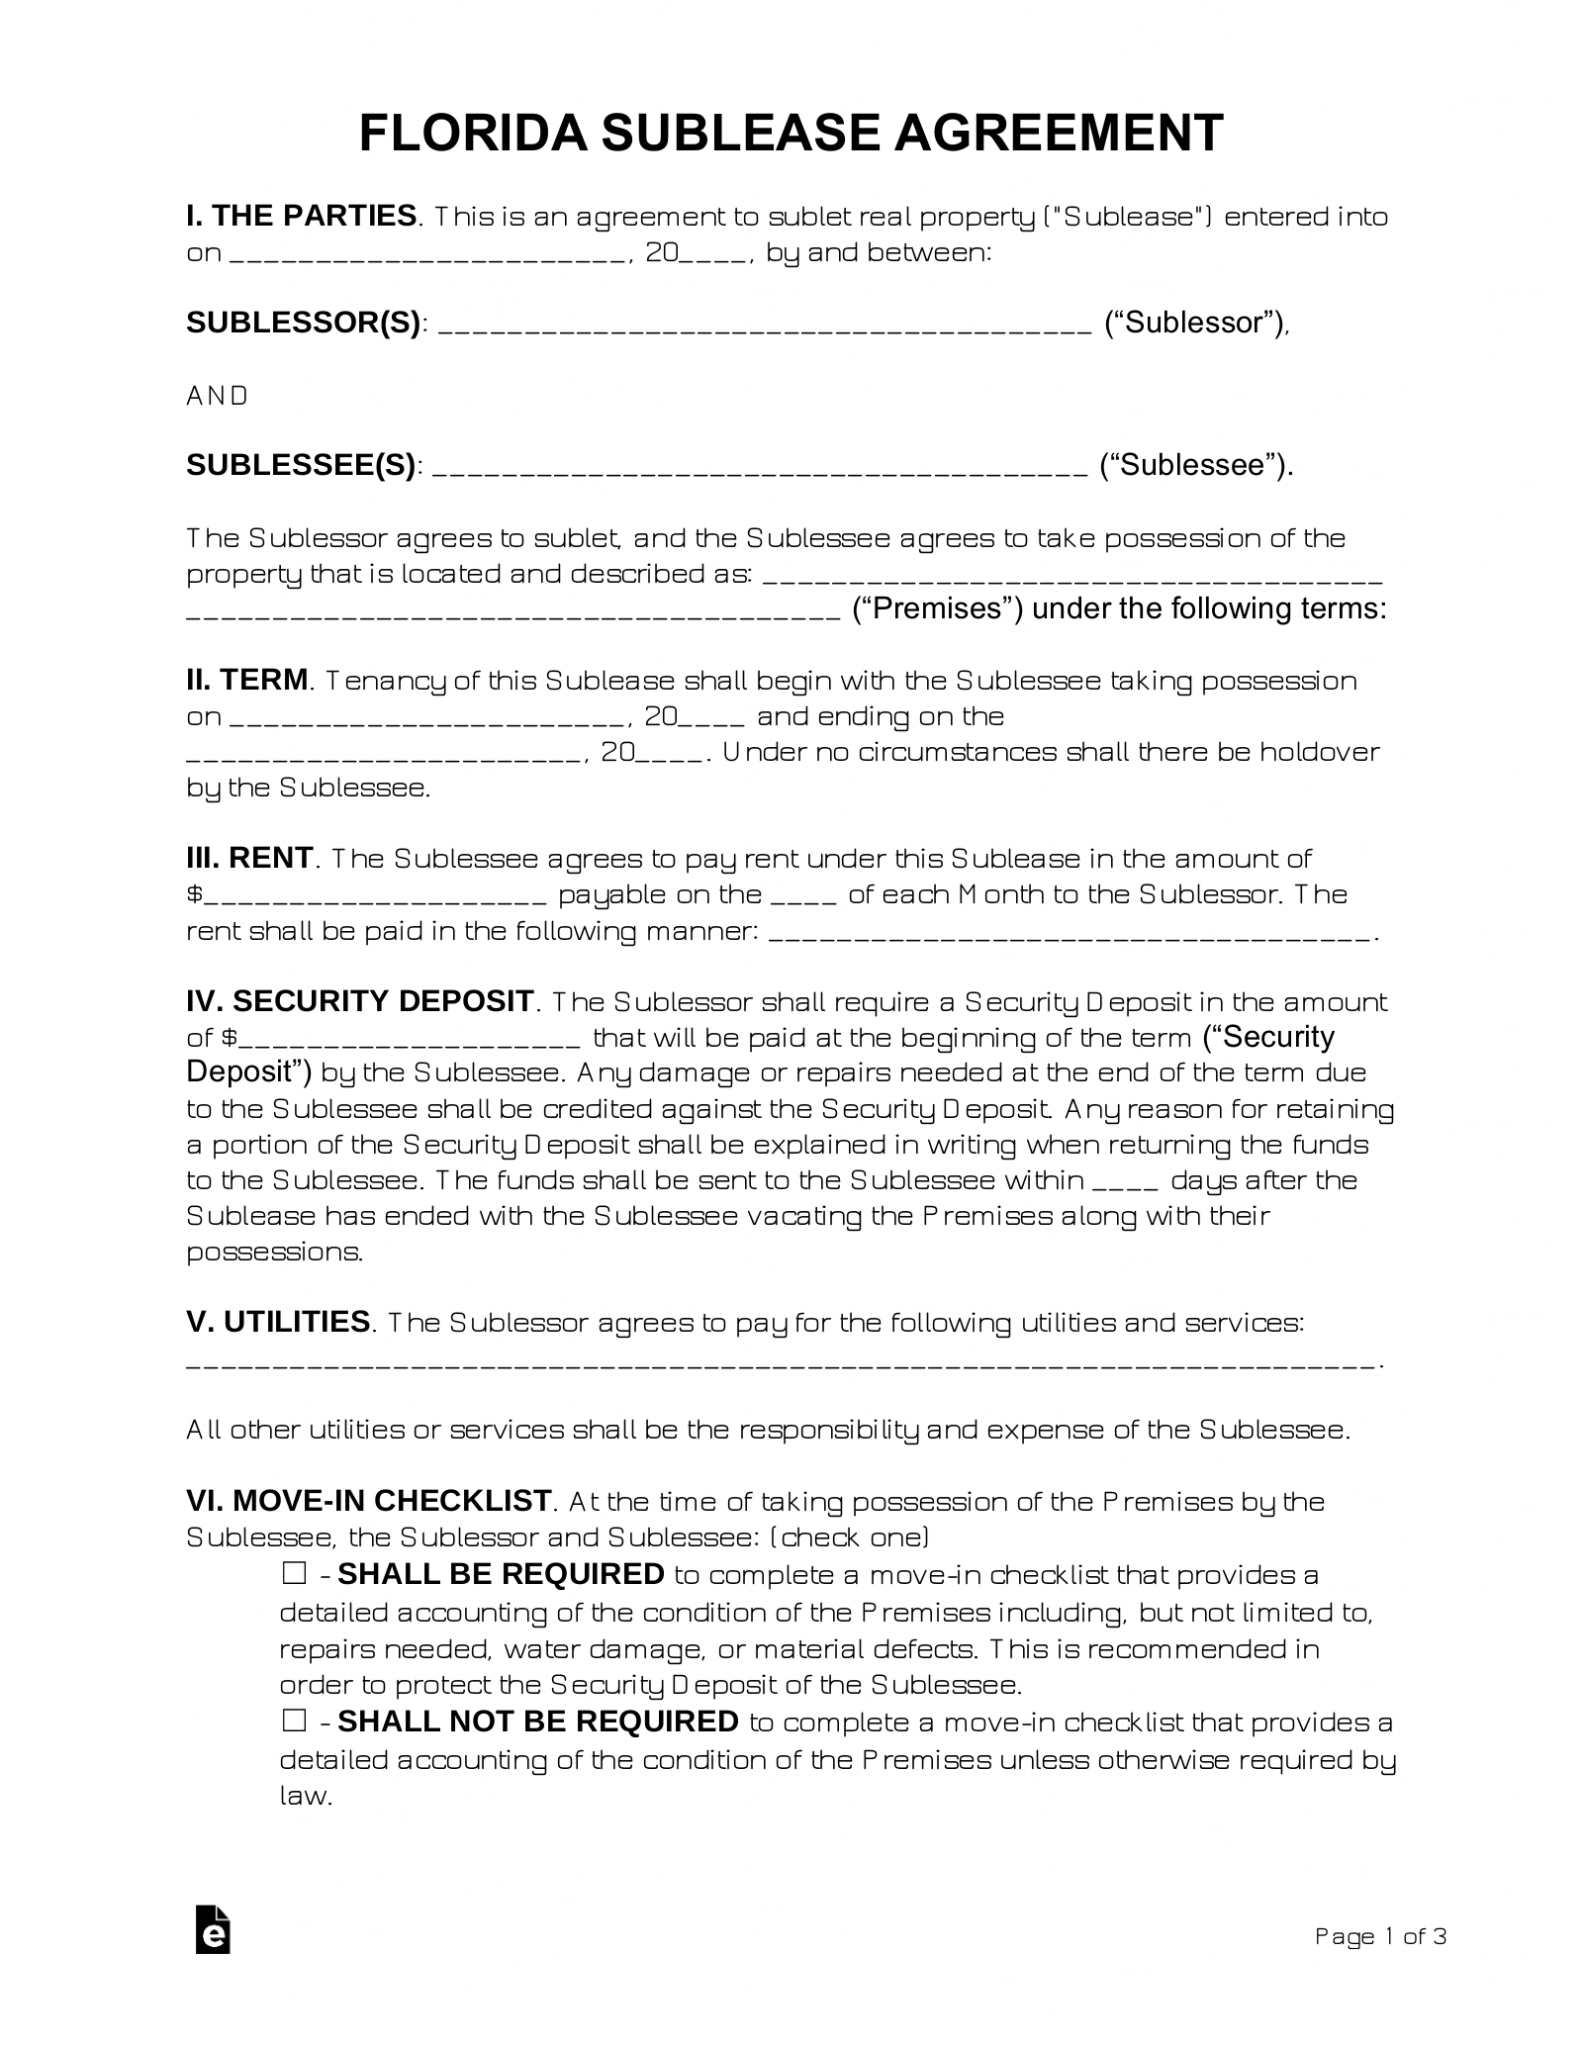 free-florida-sublease-agreement-template-pdf-word-eforms